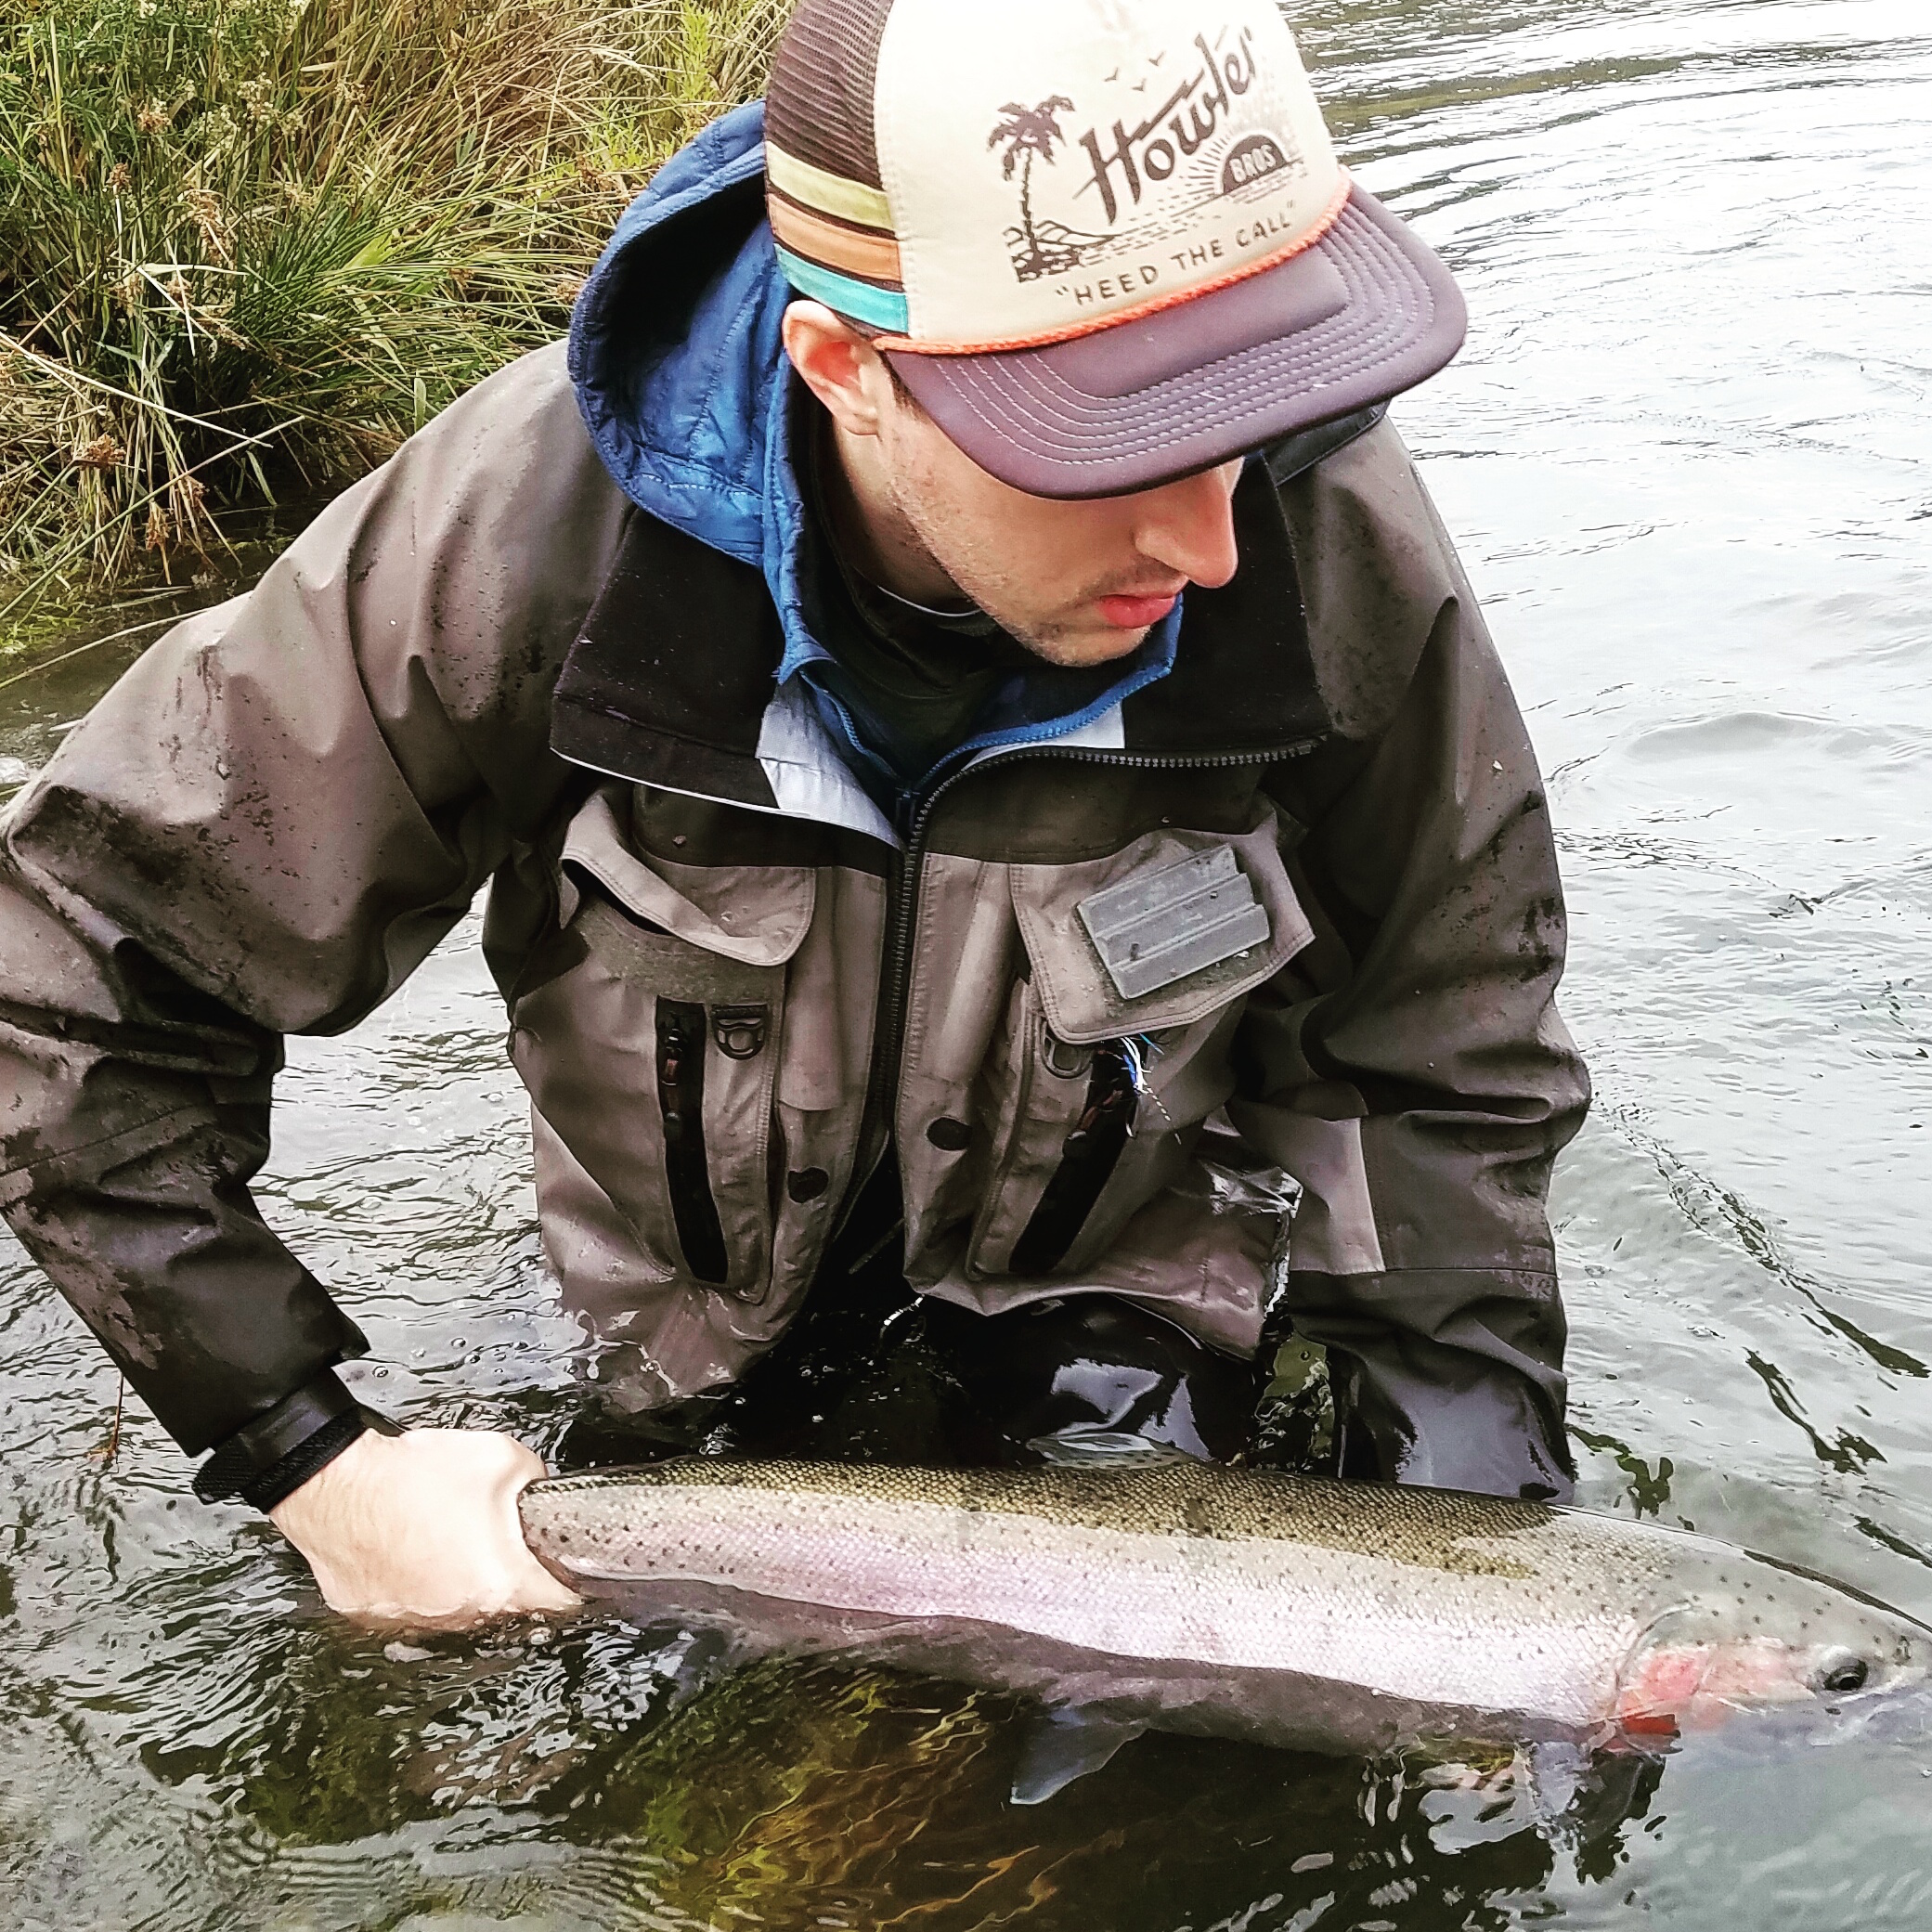 Fly Fishing Central Oregon Rivers – The Hook Fly Shop_Home of Cascade Guides